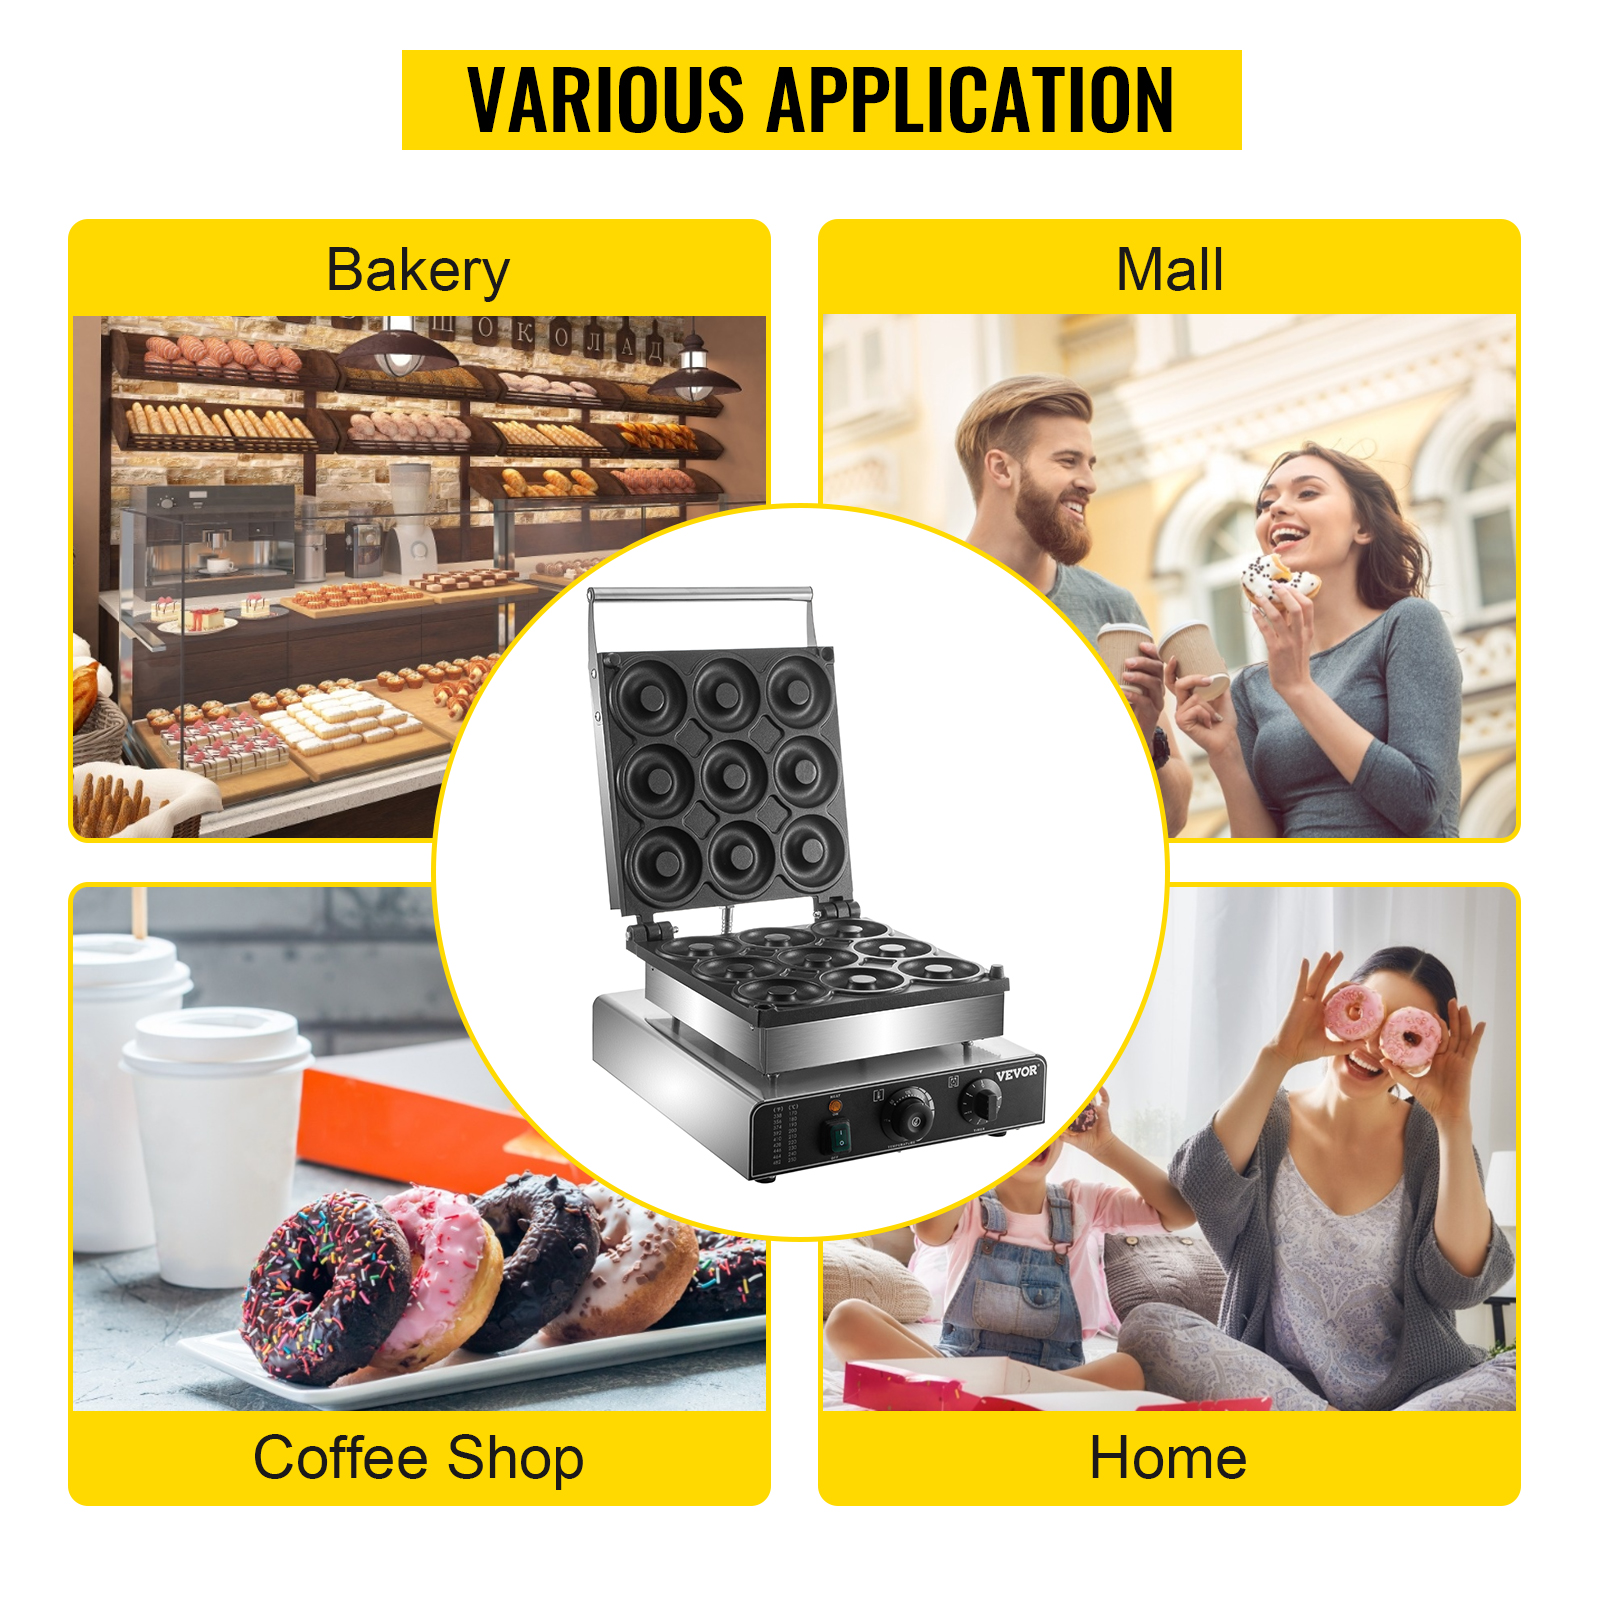 Mini Donut Maker Machine, Double Sided Heating Portable Electric Donut  Maker Machine for 7 Doughnuts (Black)